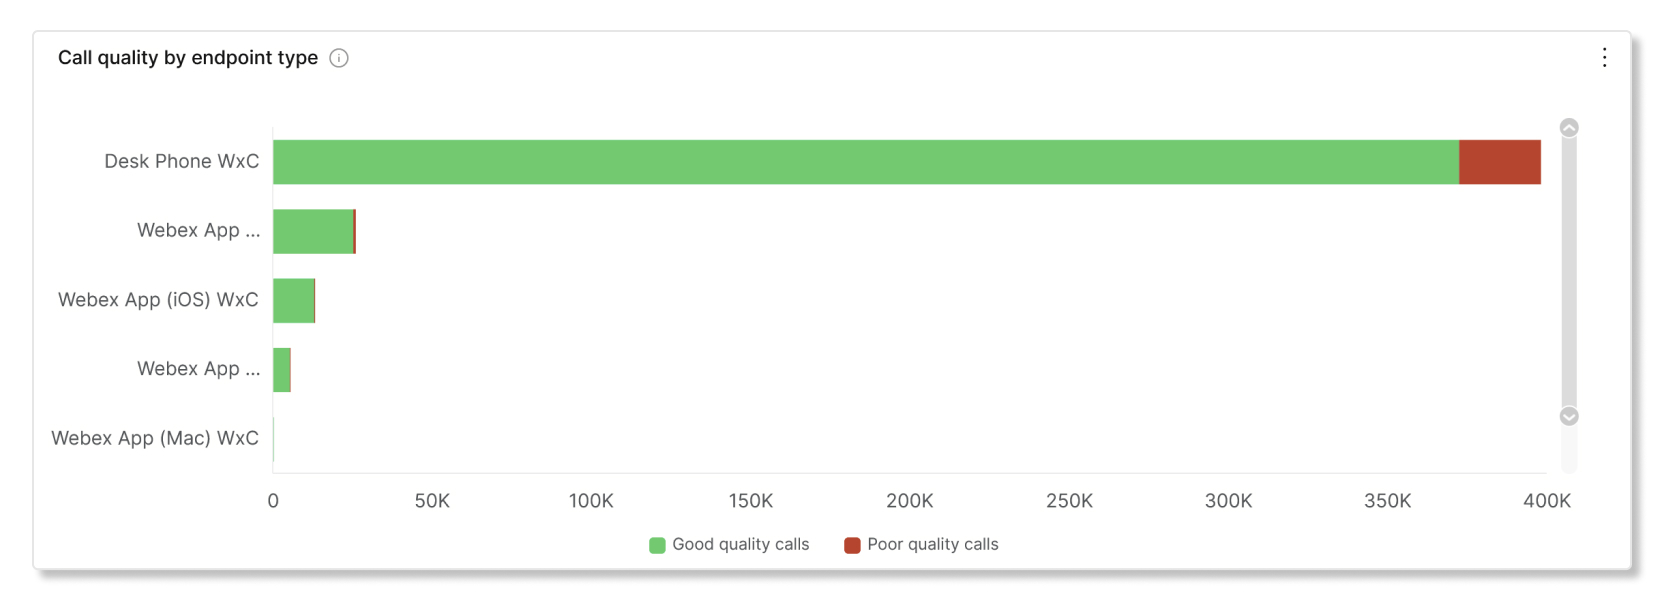 Call quality by endpoint type chart in Partner Hub calling engagement analytics